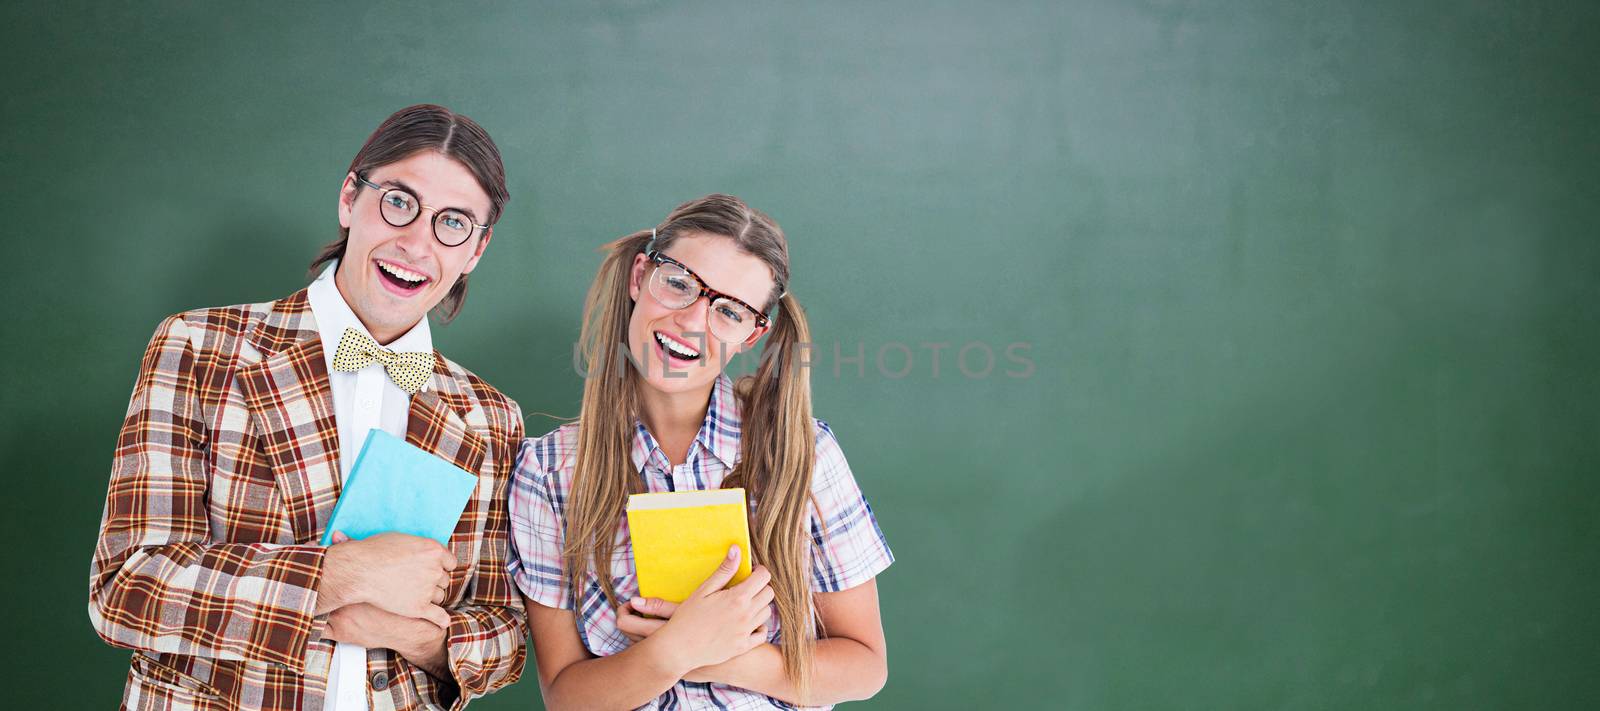 Composite image of geeky hipsters smiling at camera  by Wavebreakmedia